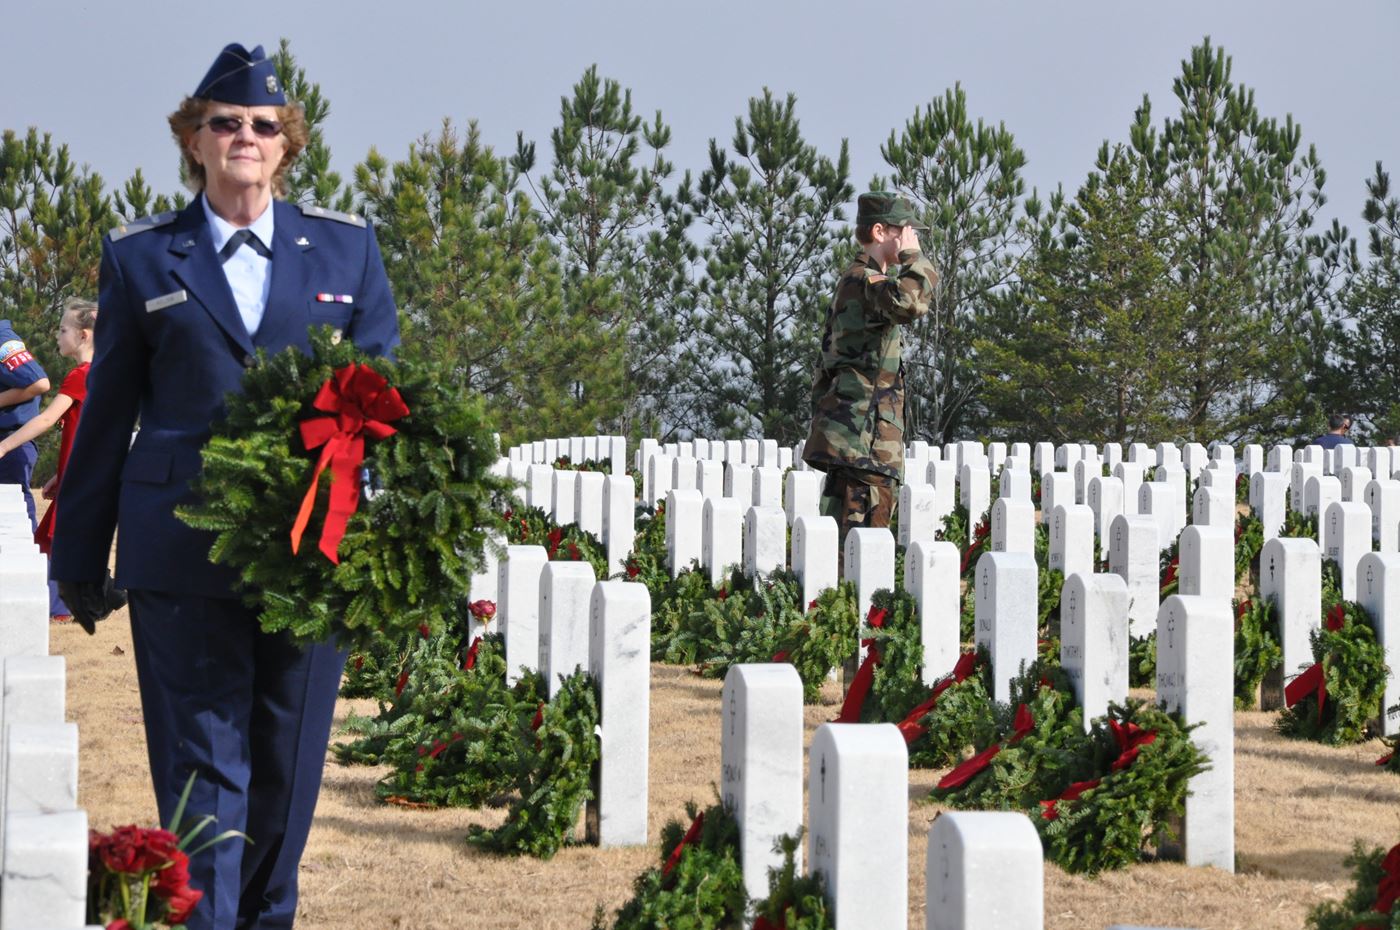 CAP Lt delivers a wreath while a cadet salutes an honoree.